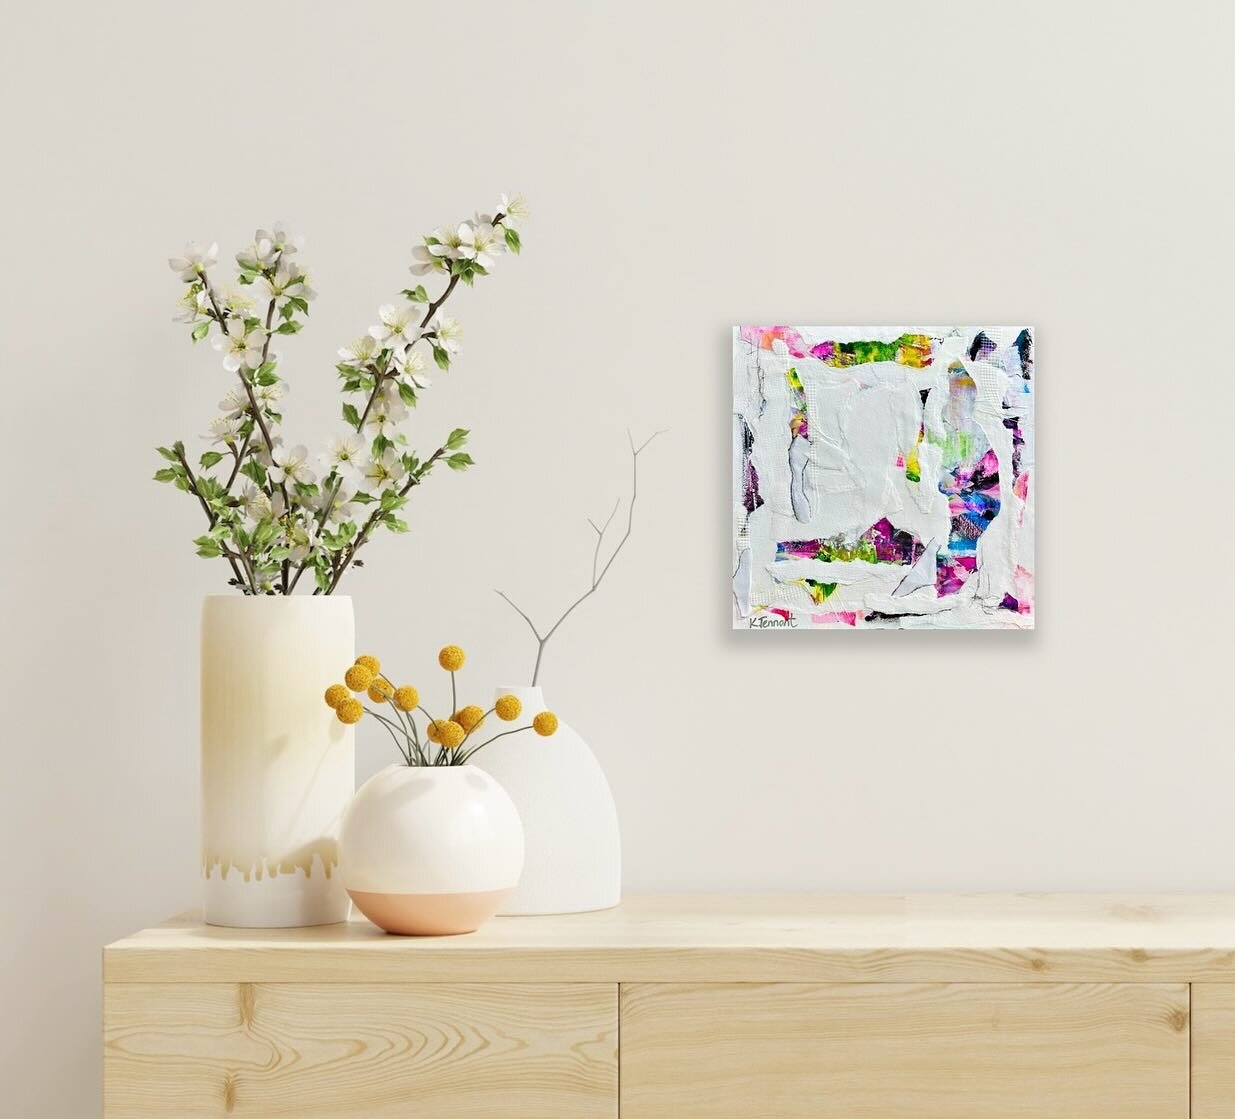 &ldquo;Sometimes I Am Torn&rdquo; is a new 12&rdquo;x12&rdquo; abstract now available! It looks really pretty with my &ldquo;Garden Of Torn Paper&rdquo; floral as shown in the last photo.